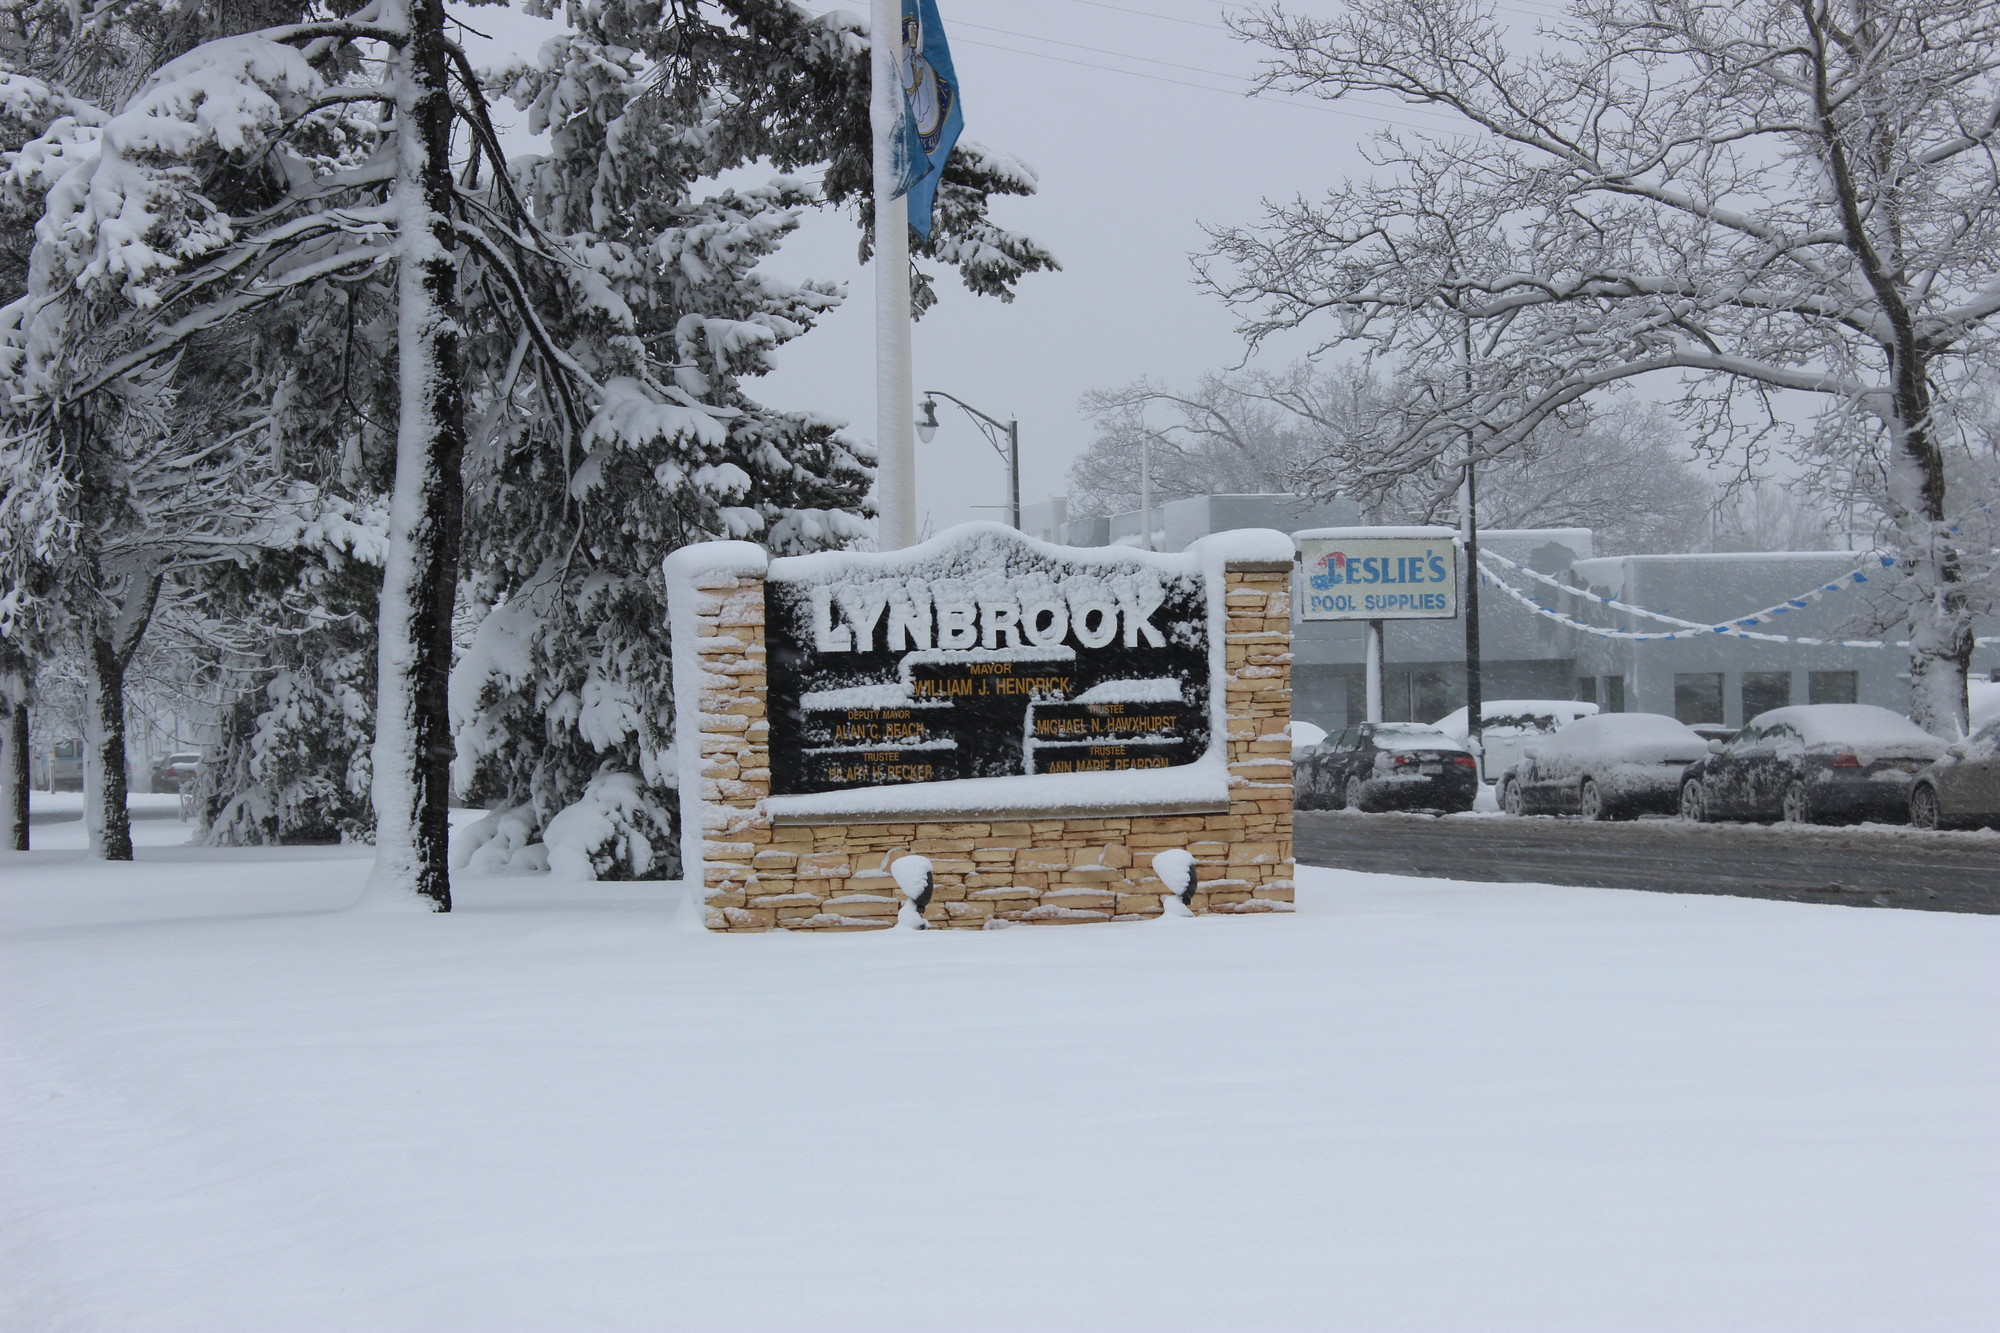 Lynbrook awoke to several inches of fallen snow on Feb. 5.